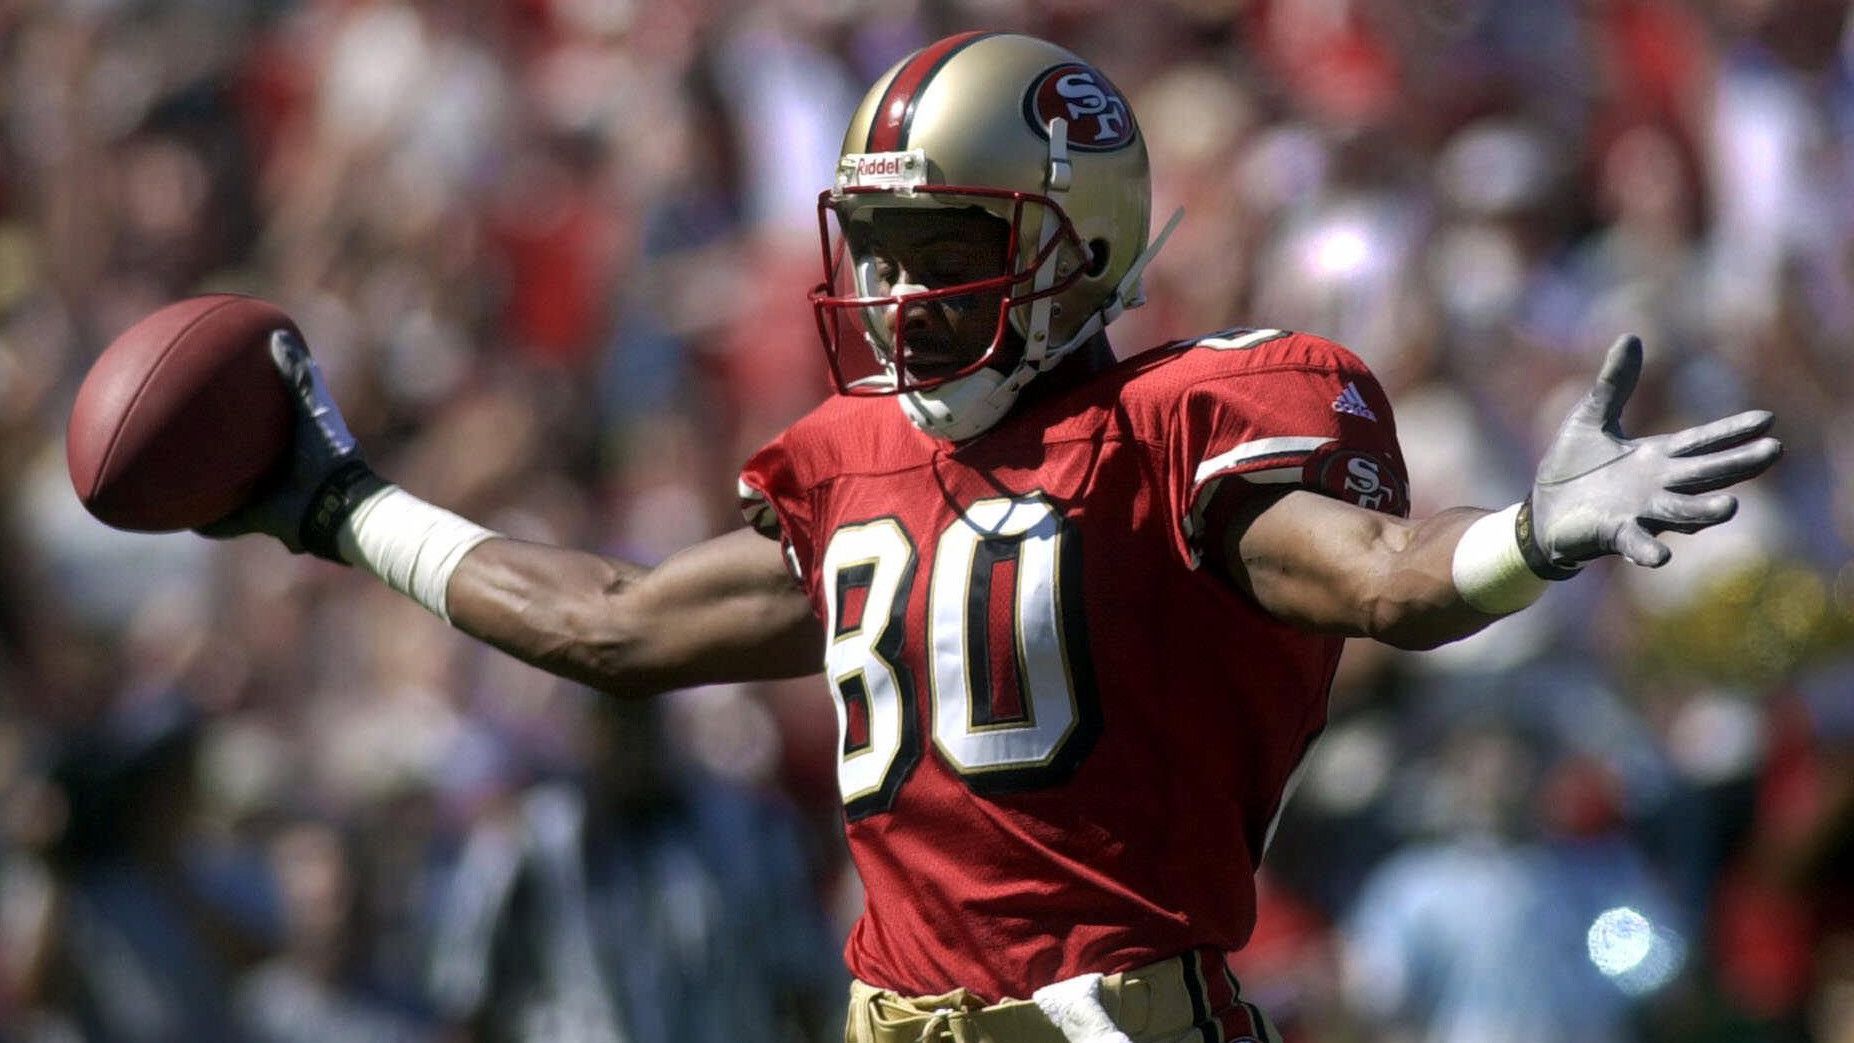 Jerry Rice said he put stickum on his gloves, then said deflating